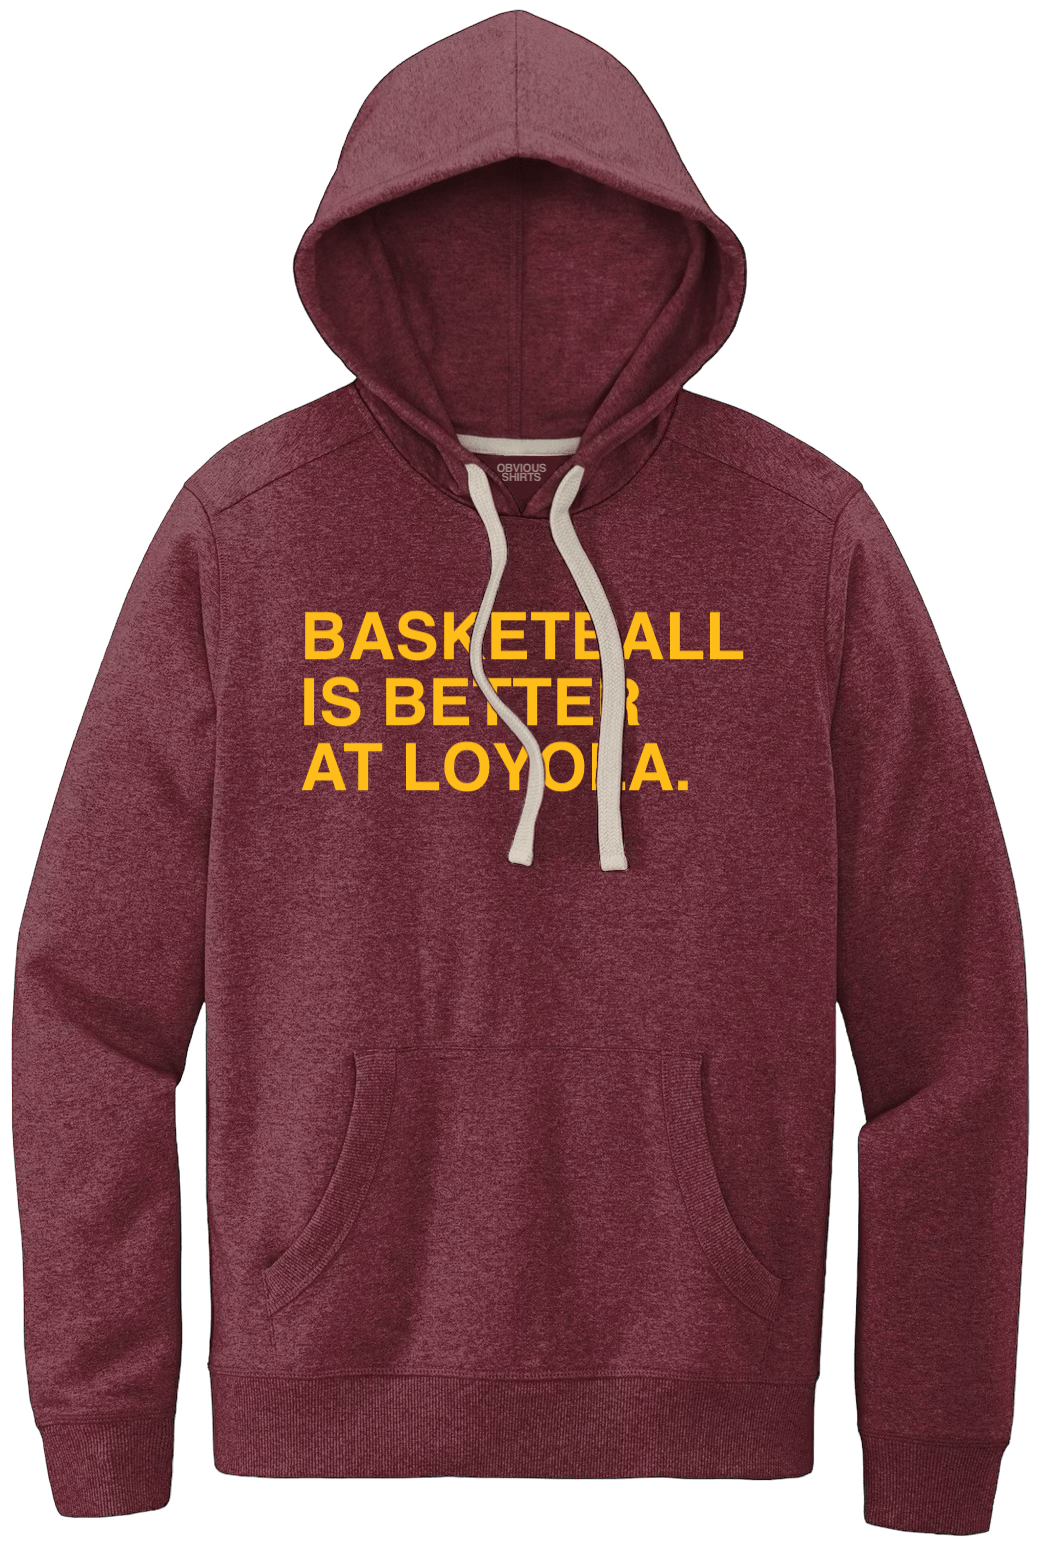 BASKETBALL IS BETTER AT LOYOLA. (HOODED SWEATSHIRT) - OBVIOUS SHIRTS